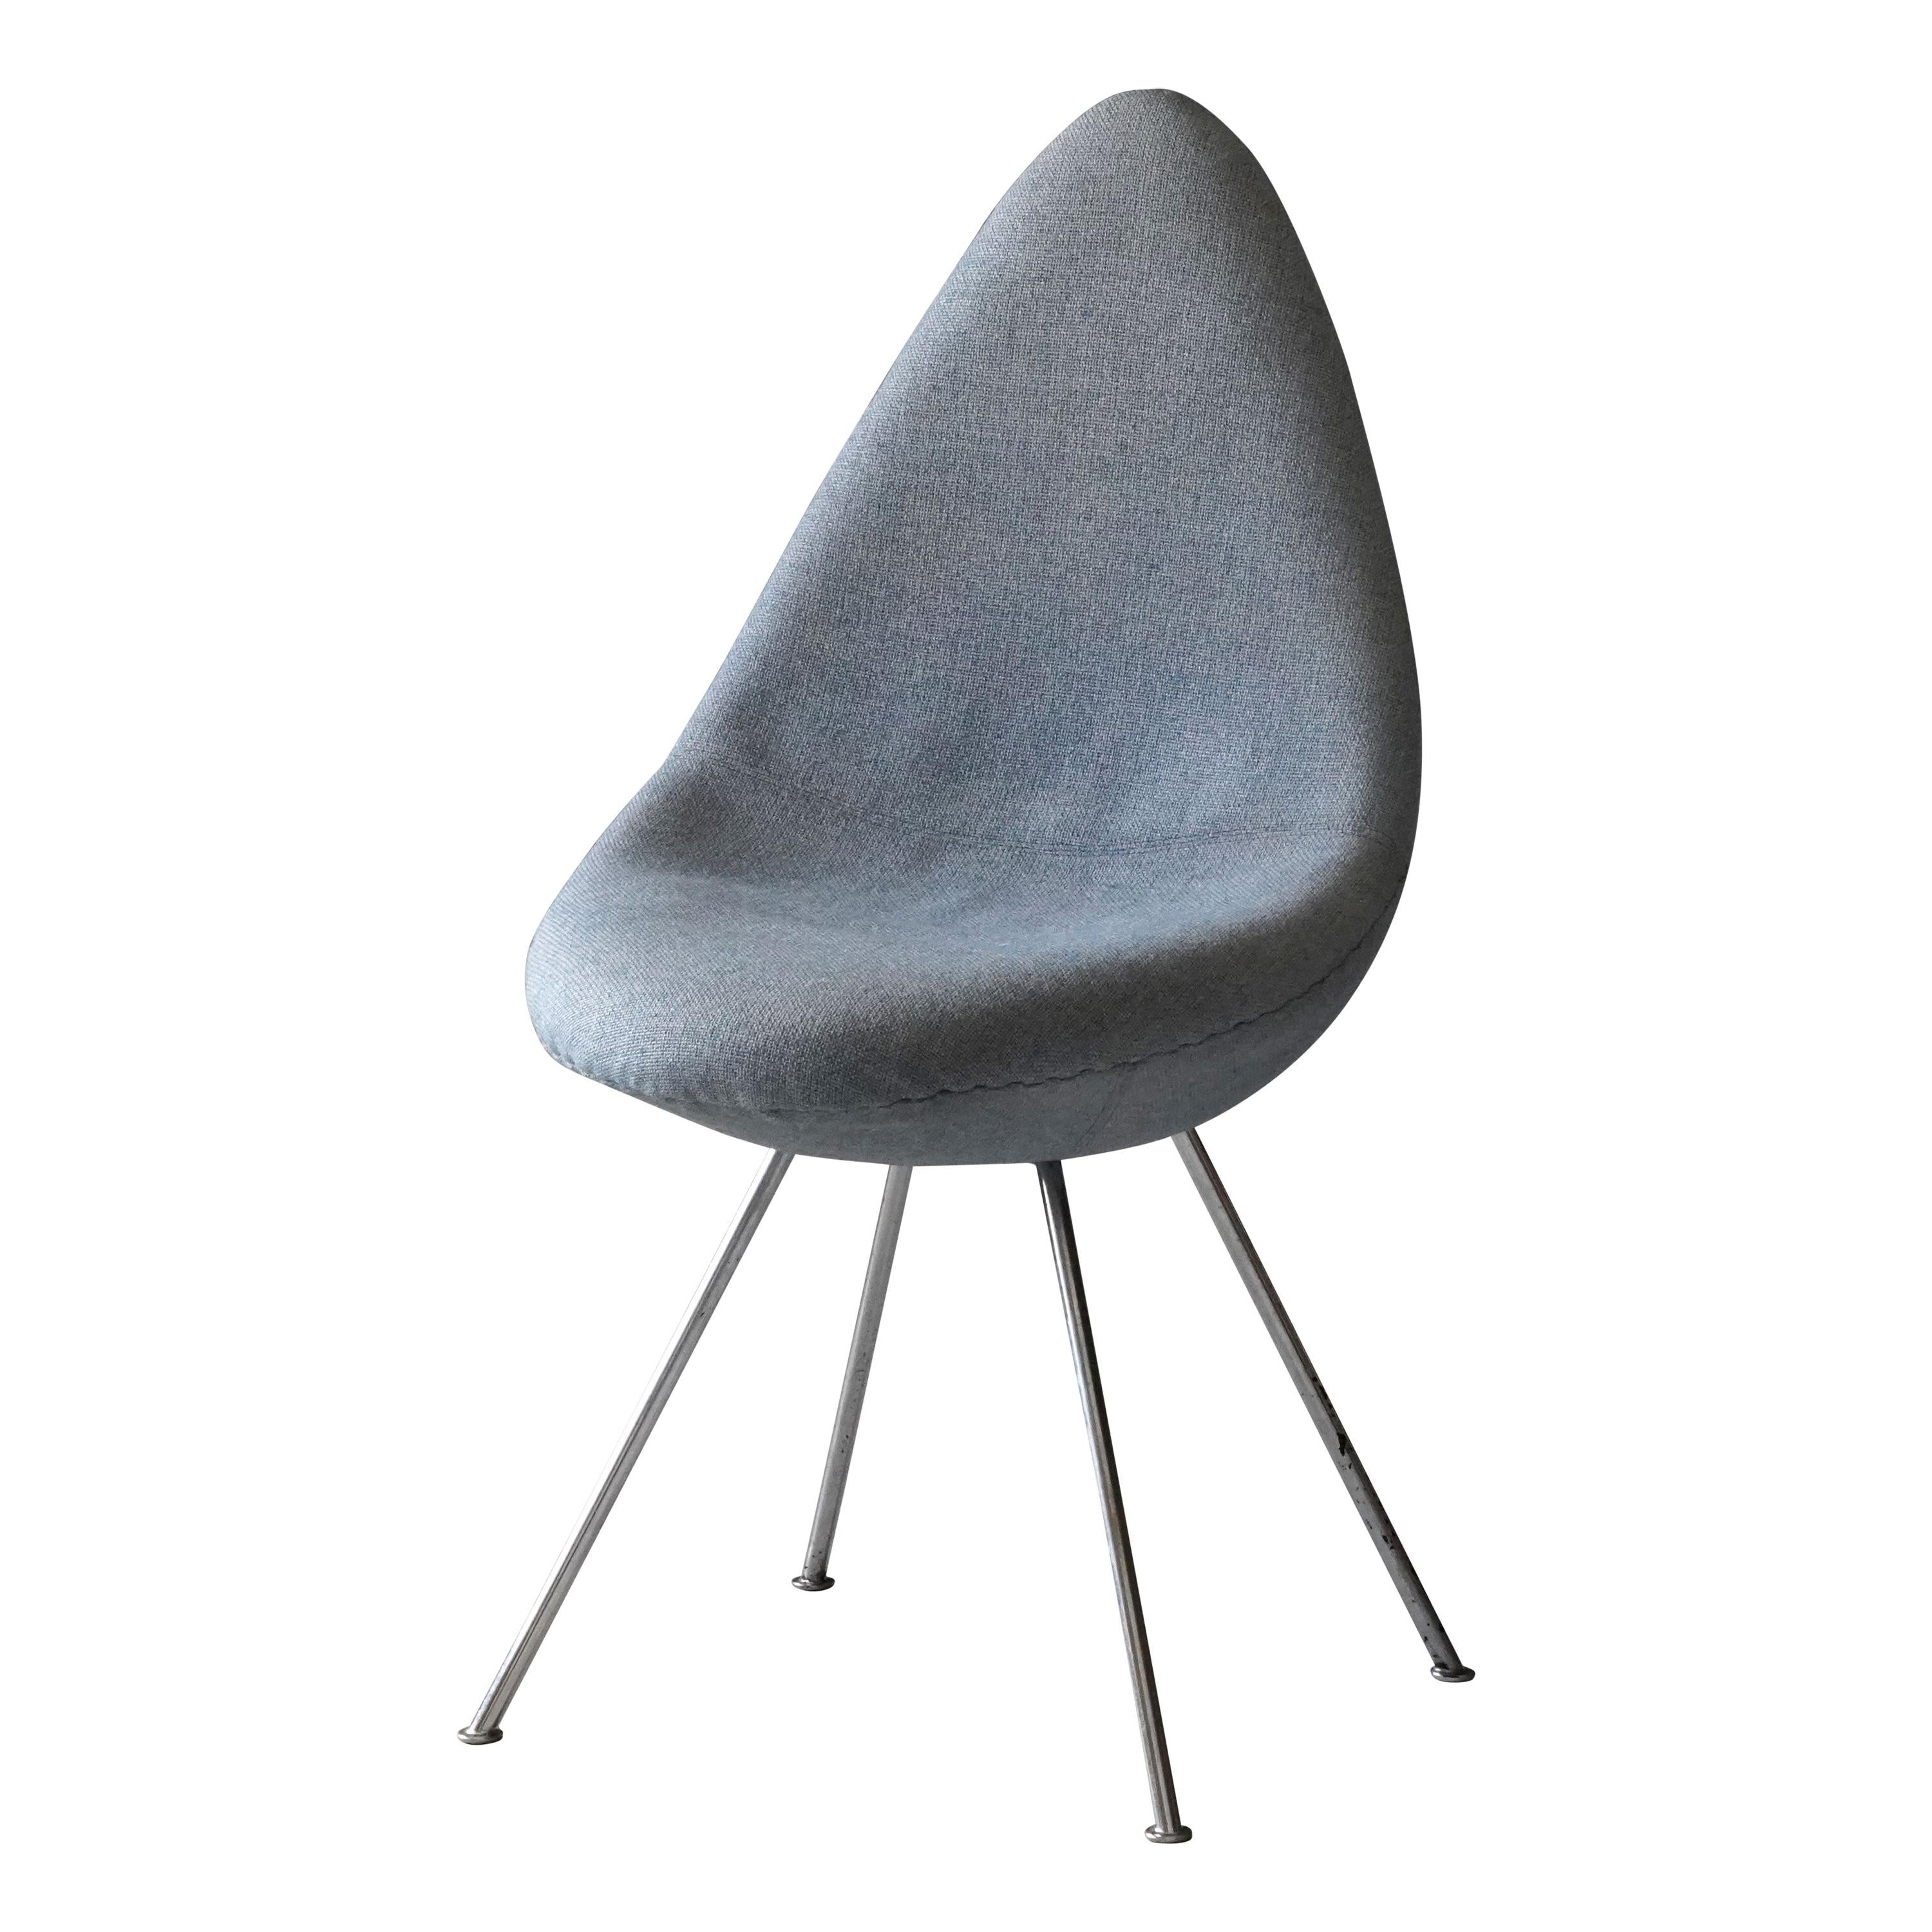 Arne Jacobsen, "Drop" Side Chair from SAS Royal Hotel, Metal, Blue Fabric, 1958